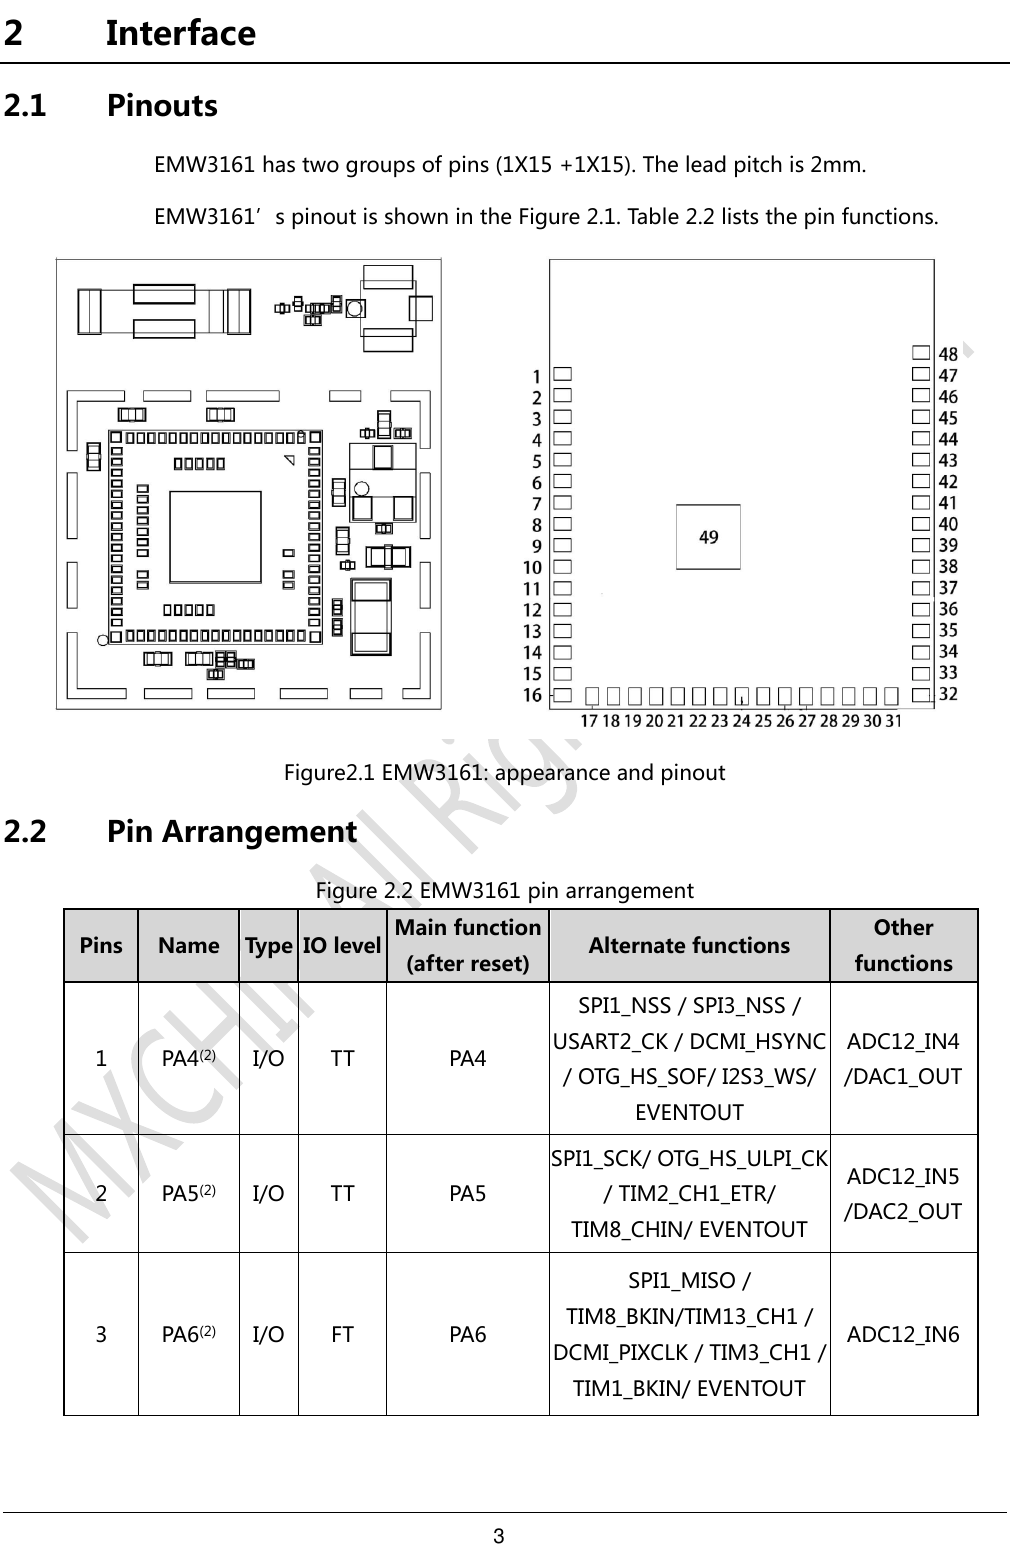 3     2 Interface 2.1 Pinouts EMW3161 has two groups of pins (1X15 +1X15). The lead pitch is 2mm. EMW3161’s pinout is shown in the Figure 2.1. Table 2.2 lists the pin functions.  Figure2.1 EMW3161: appearance and pinout 2.2 Pin Arrangement Figure 2.2 EMW3161 pin arrangement Pins Name Type IO level Main function (after reset) Alternate functions Other functions 1 PA4(2) I/O TT PA4 SPI1_NSS / SPI3_NSS / USART2_CK / DCMI_HSYNC / OTG_HS_SOF/ I2S3_WS/ EVENTOUT ADC12_IN4 /DAC1_OUT 2 PA5(2) I/O TT PA5 SPI1_SCK/ OTG_HS_ULPI_CK / TIM2_CH1_ETR/ TIM8_CHIN/ EVENTOUT ADC12_IN5 /DAC2_OUT 3 PA6(2) I/O FT PA6 SPI1_MISO / TIM8_BKIN/TIM13_CH1 / DCMI_PIXCLK / TIM3_CH1 / TIM1_BKIN/ EVENTOUT ADC12_IN6 